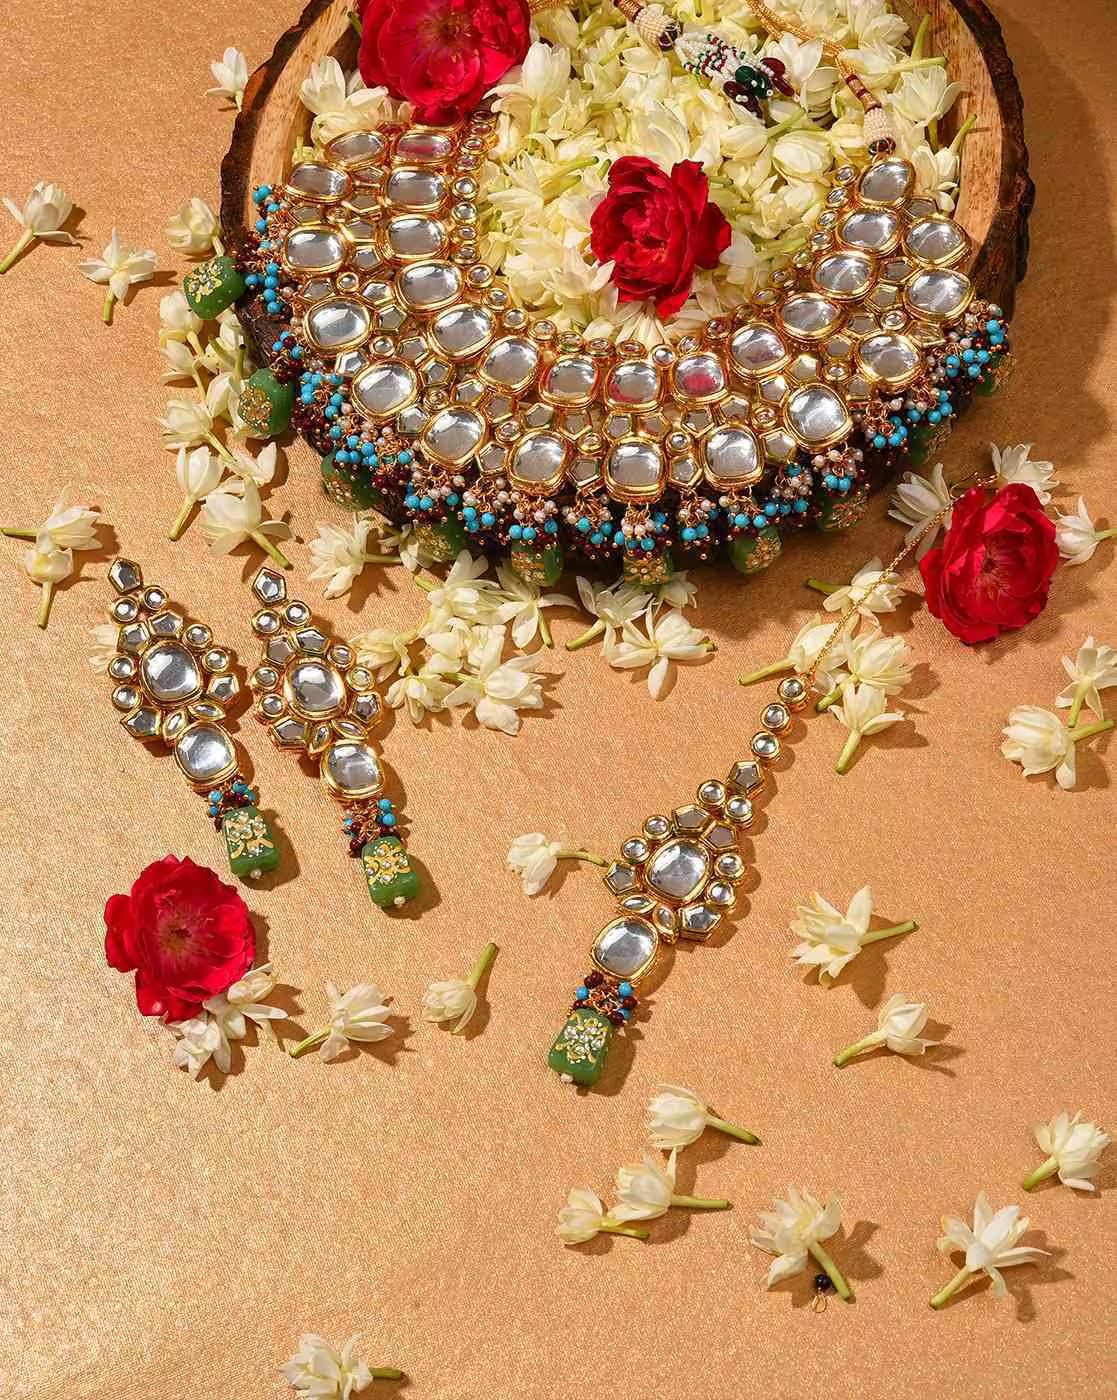 Bridal Jewellery Photoshoot Is A Trend That’s Catching Up